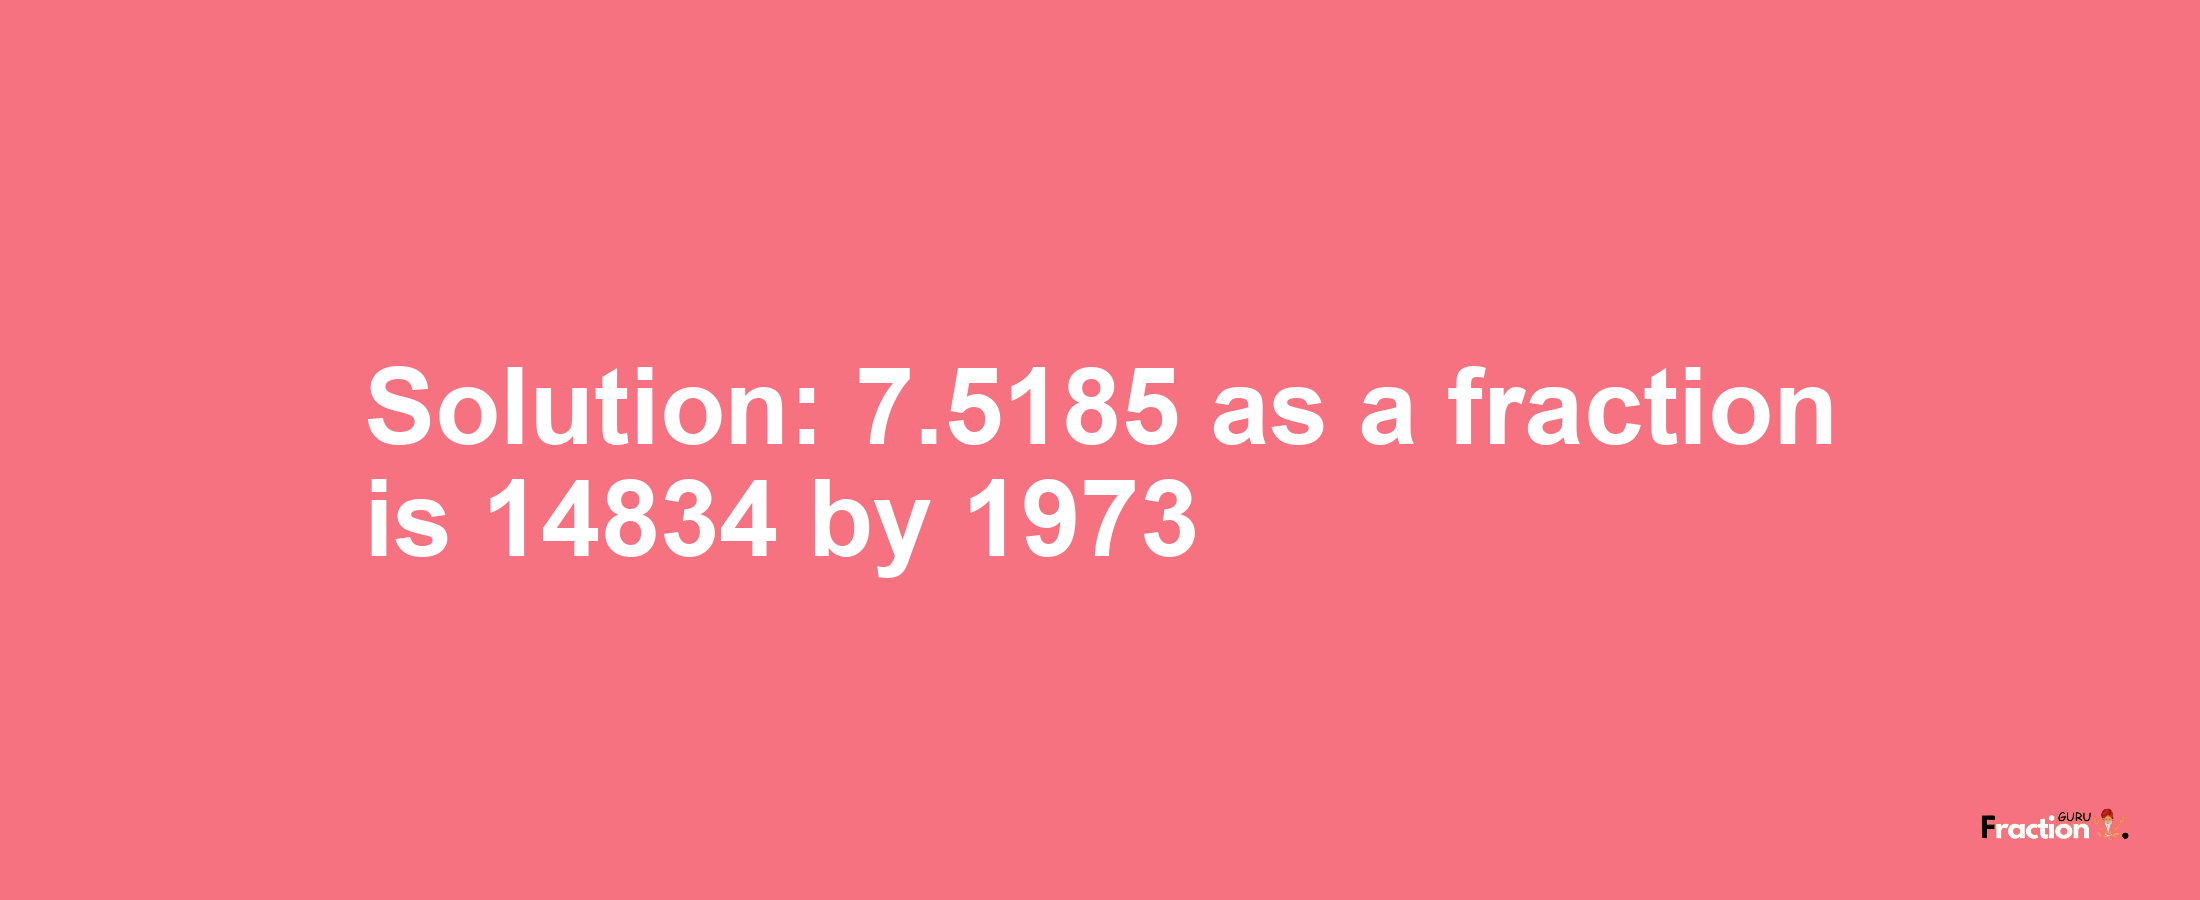 Solution:7.5185 as a fraction is 14834/1973